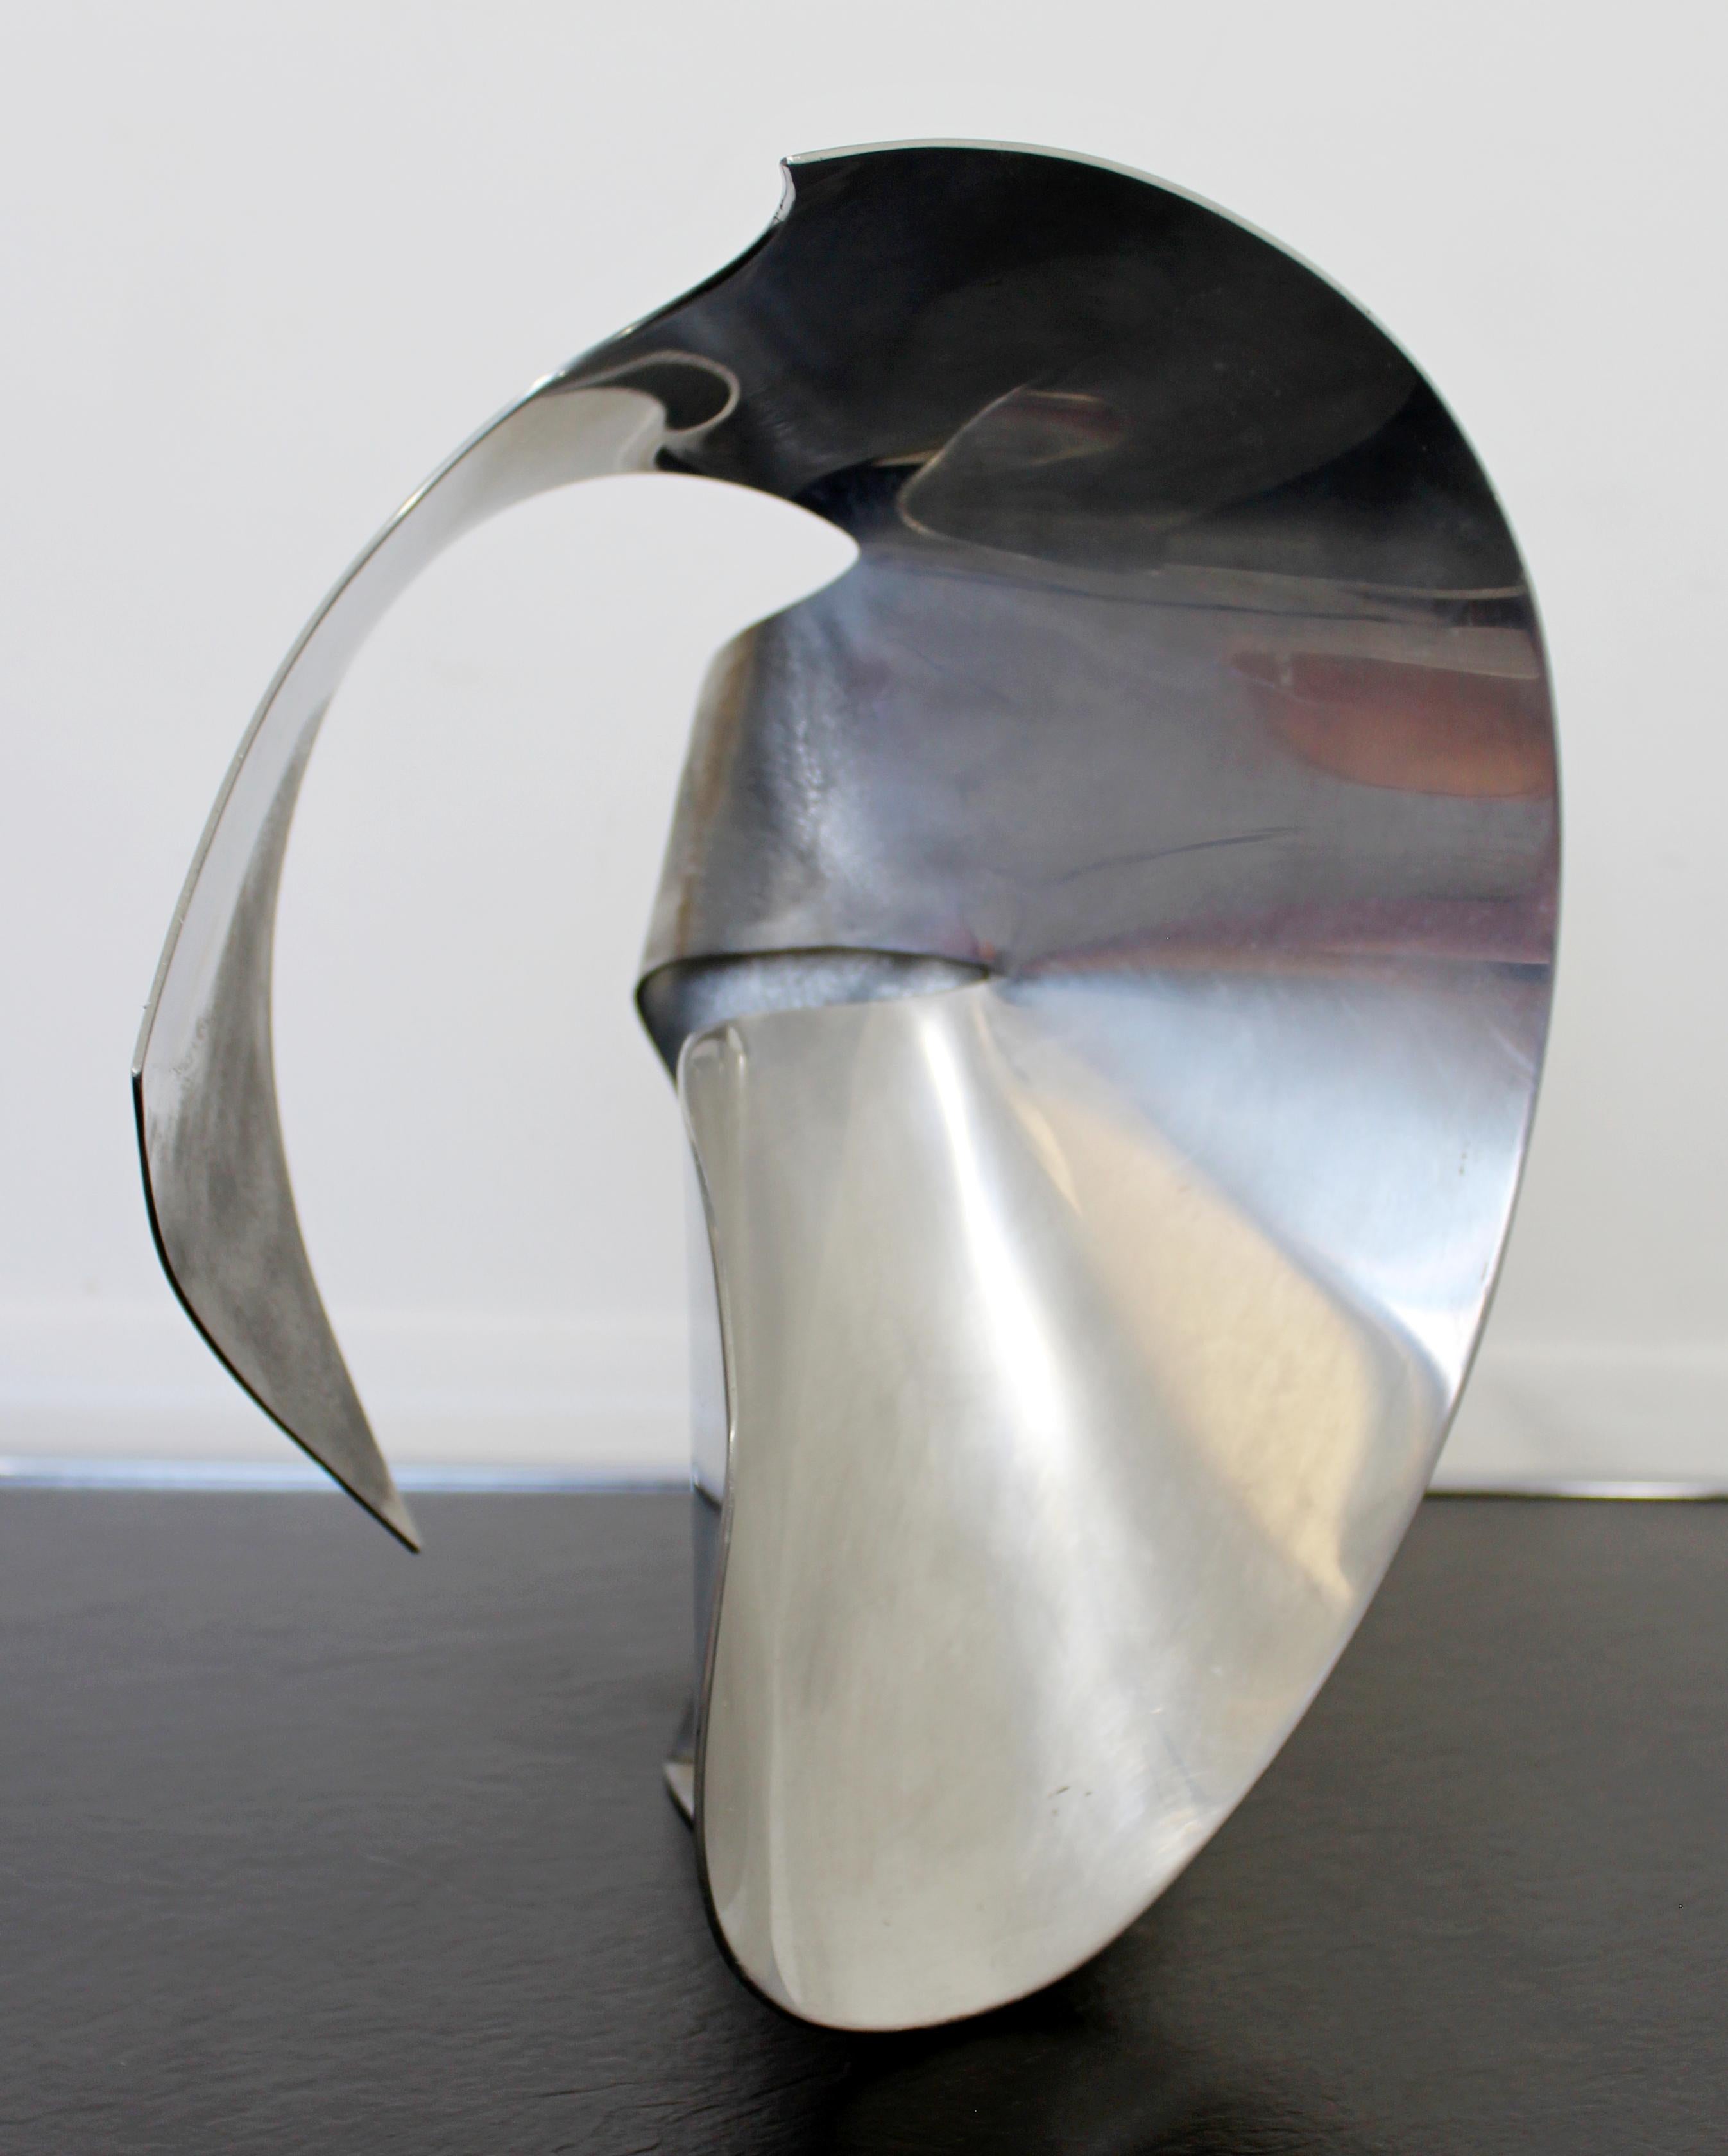 For your consideration is a captivating abstract circular aluminum sculpture titled 